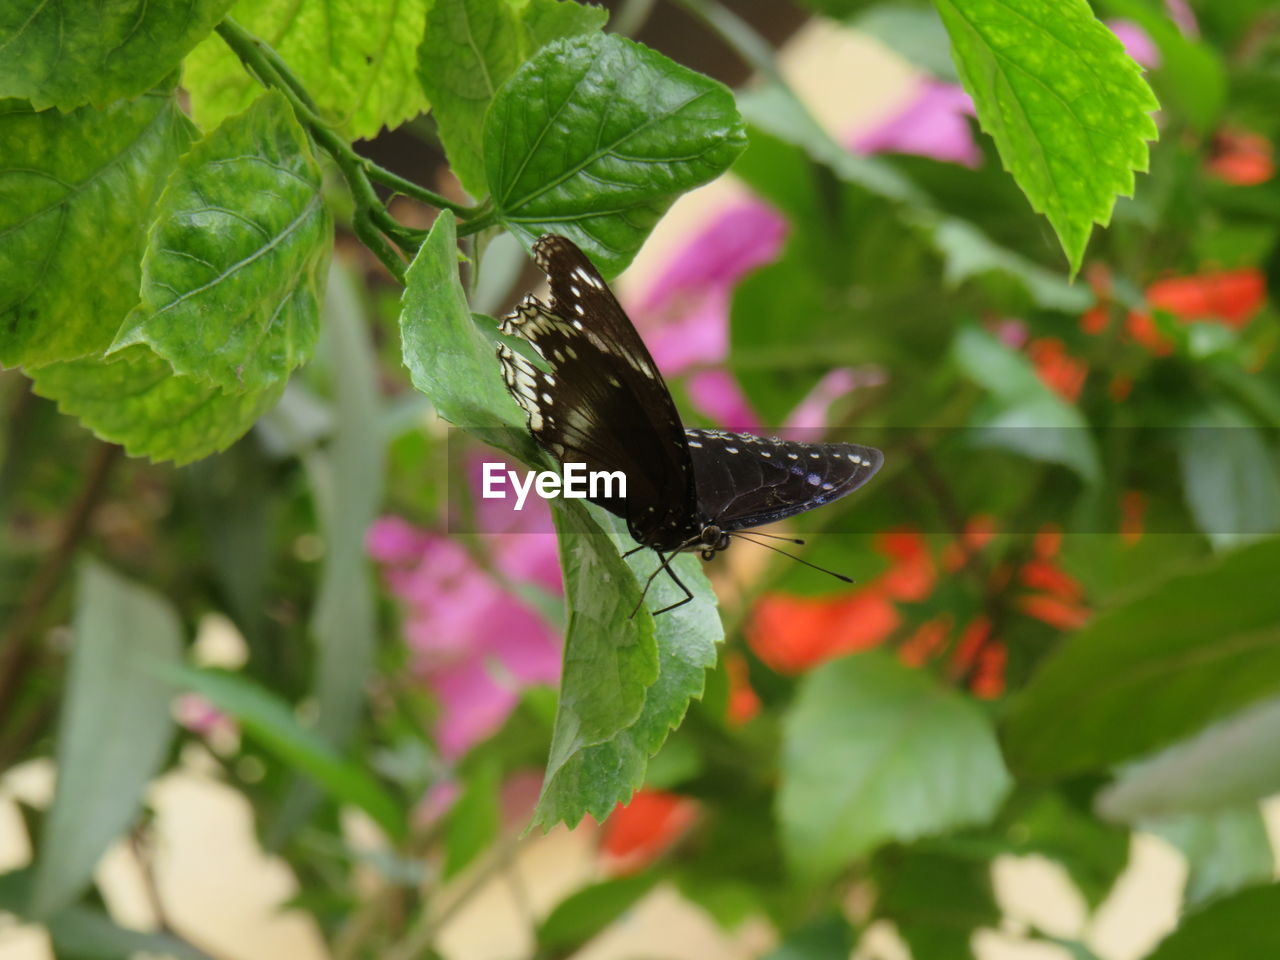 CLOSE-UP OF BUTTERFLY POLLINATING ON LEAF